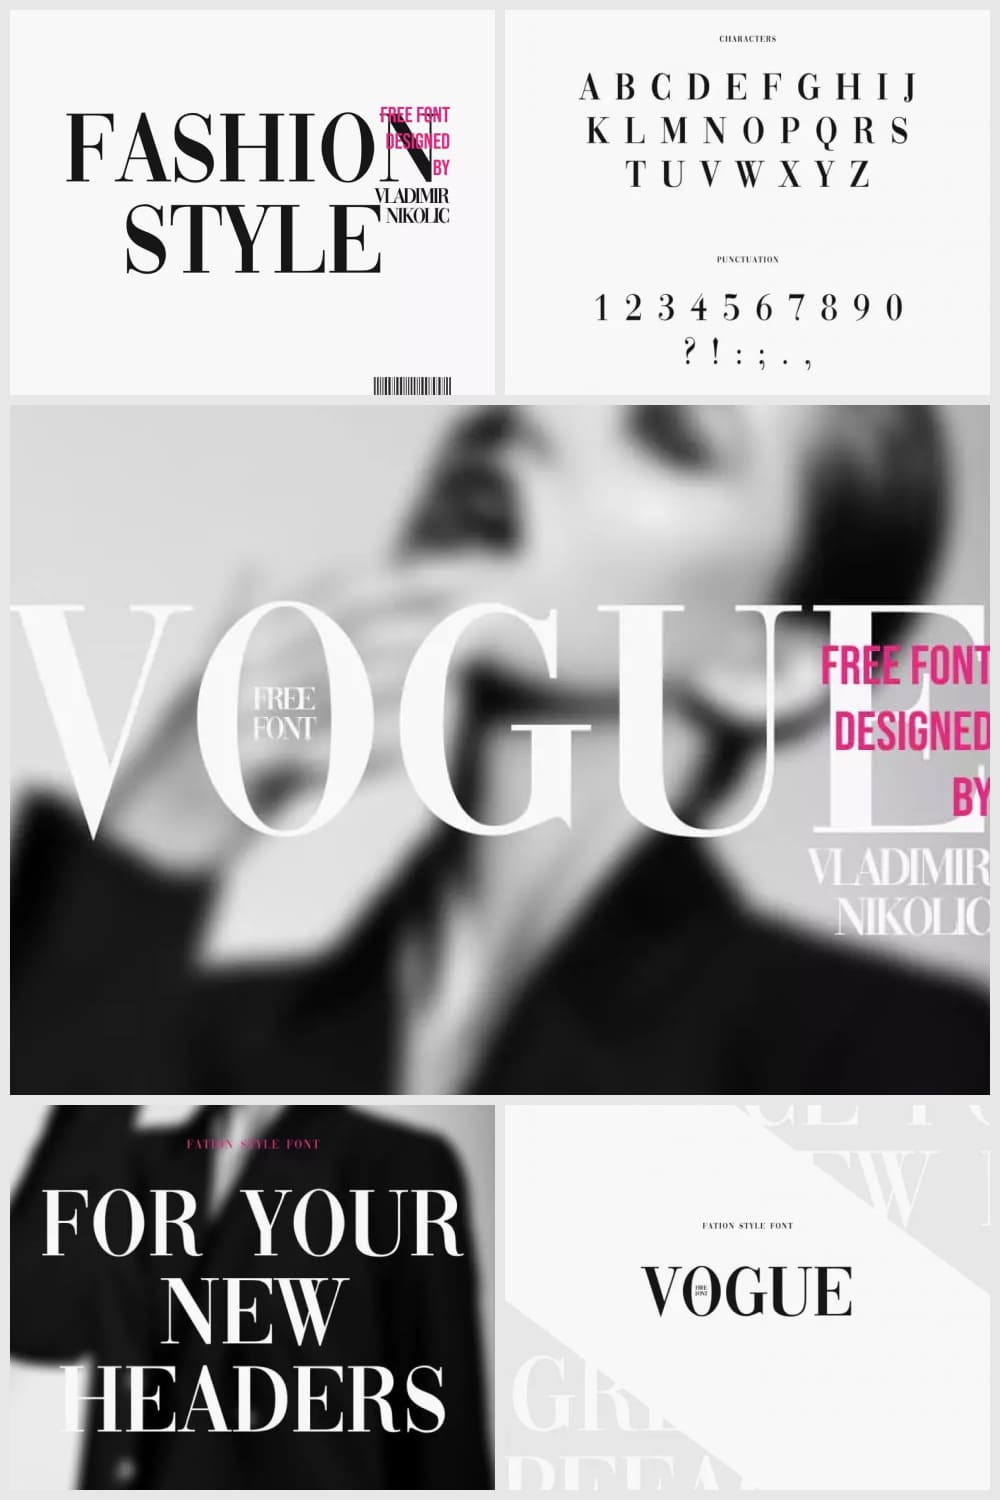 Fashion font on the background of magazine covers.